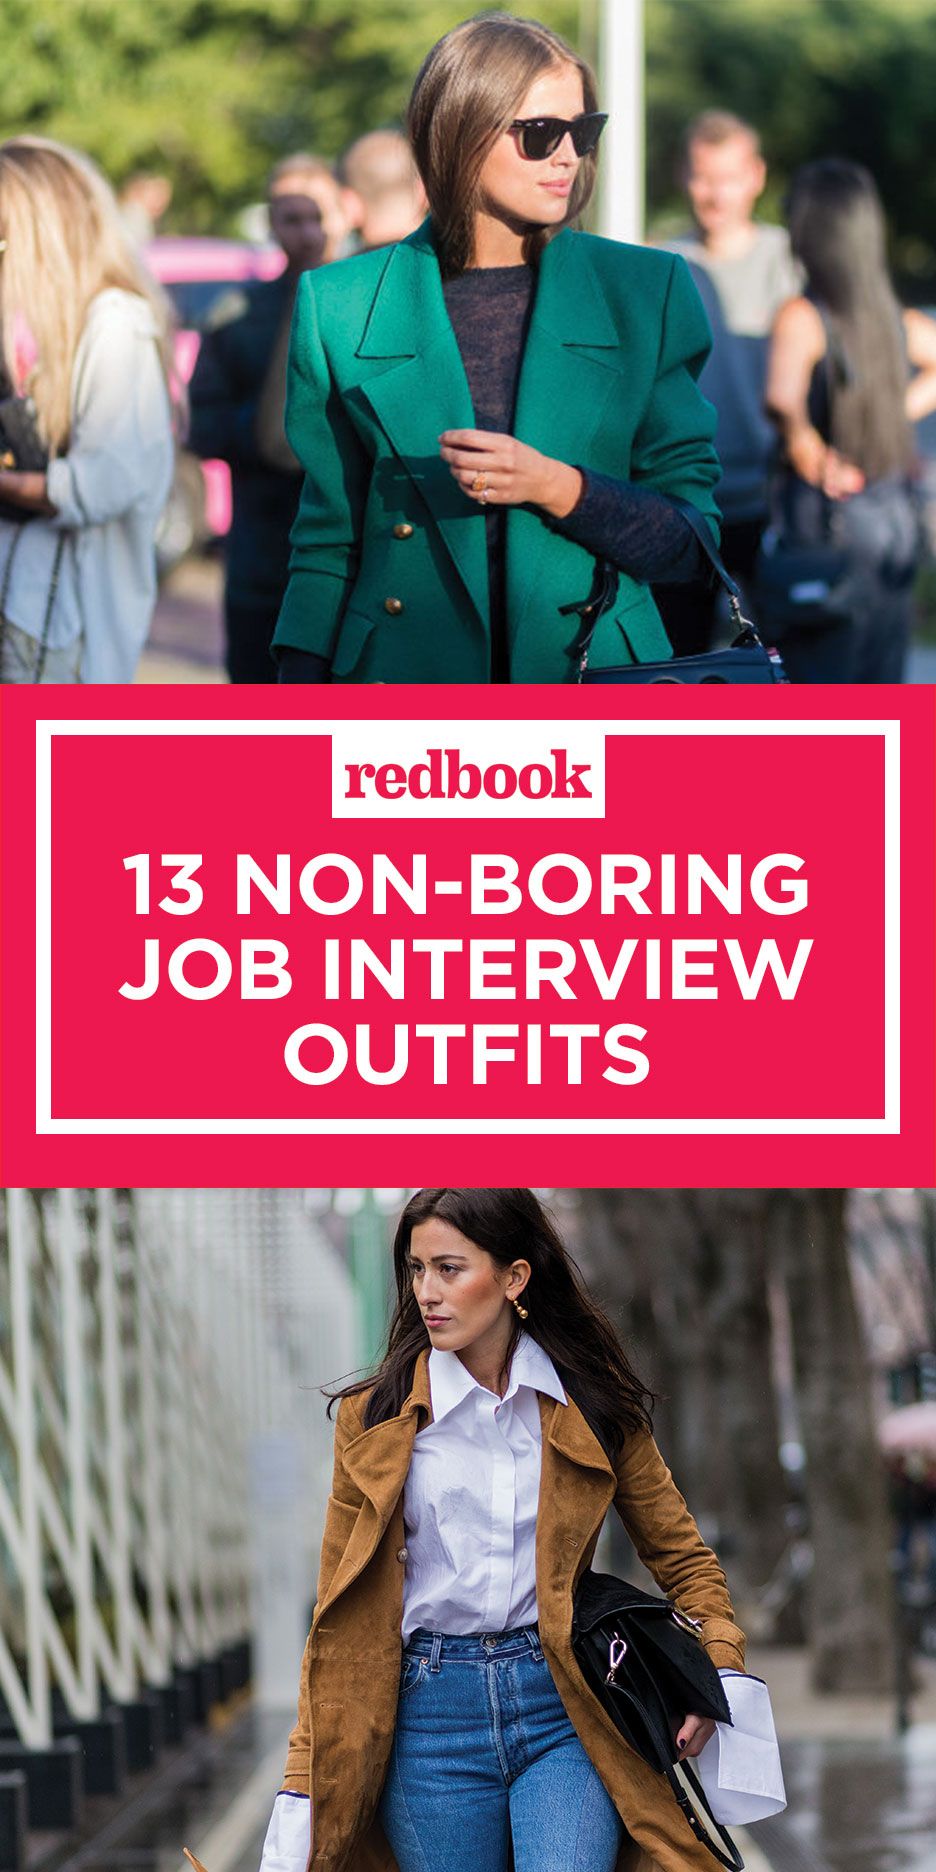 Interview Outfits for Women - The Curated Rulebook